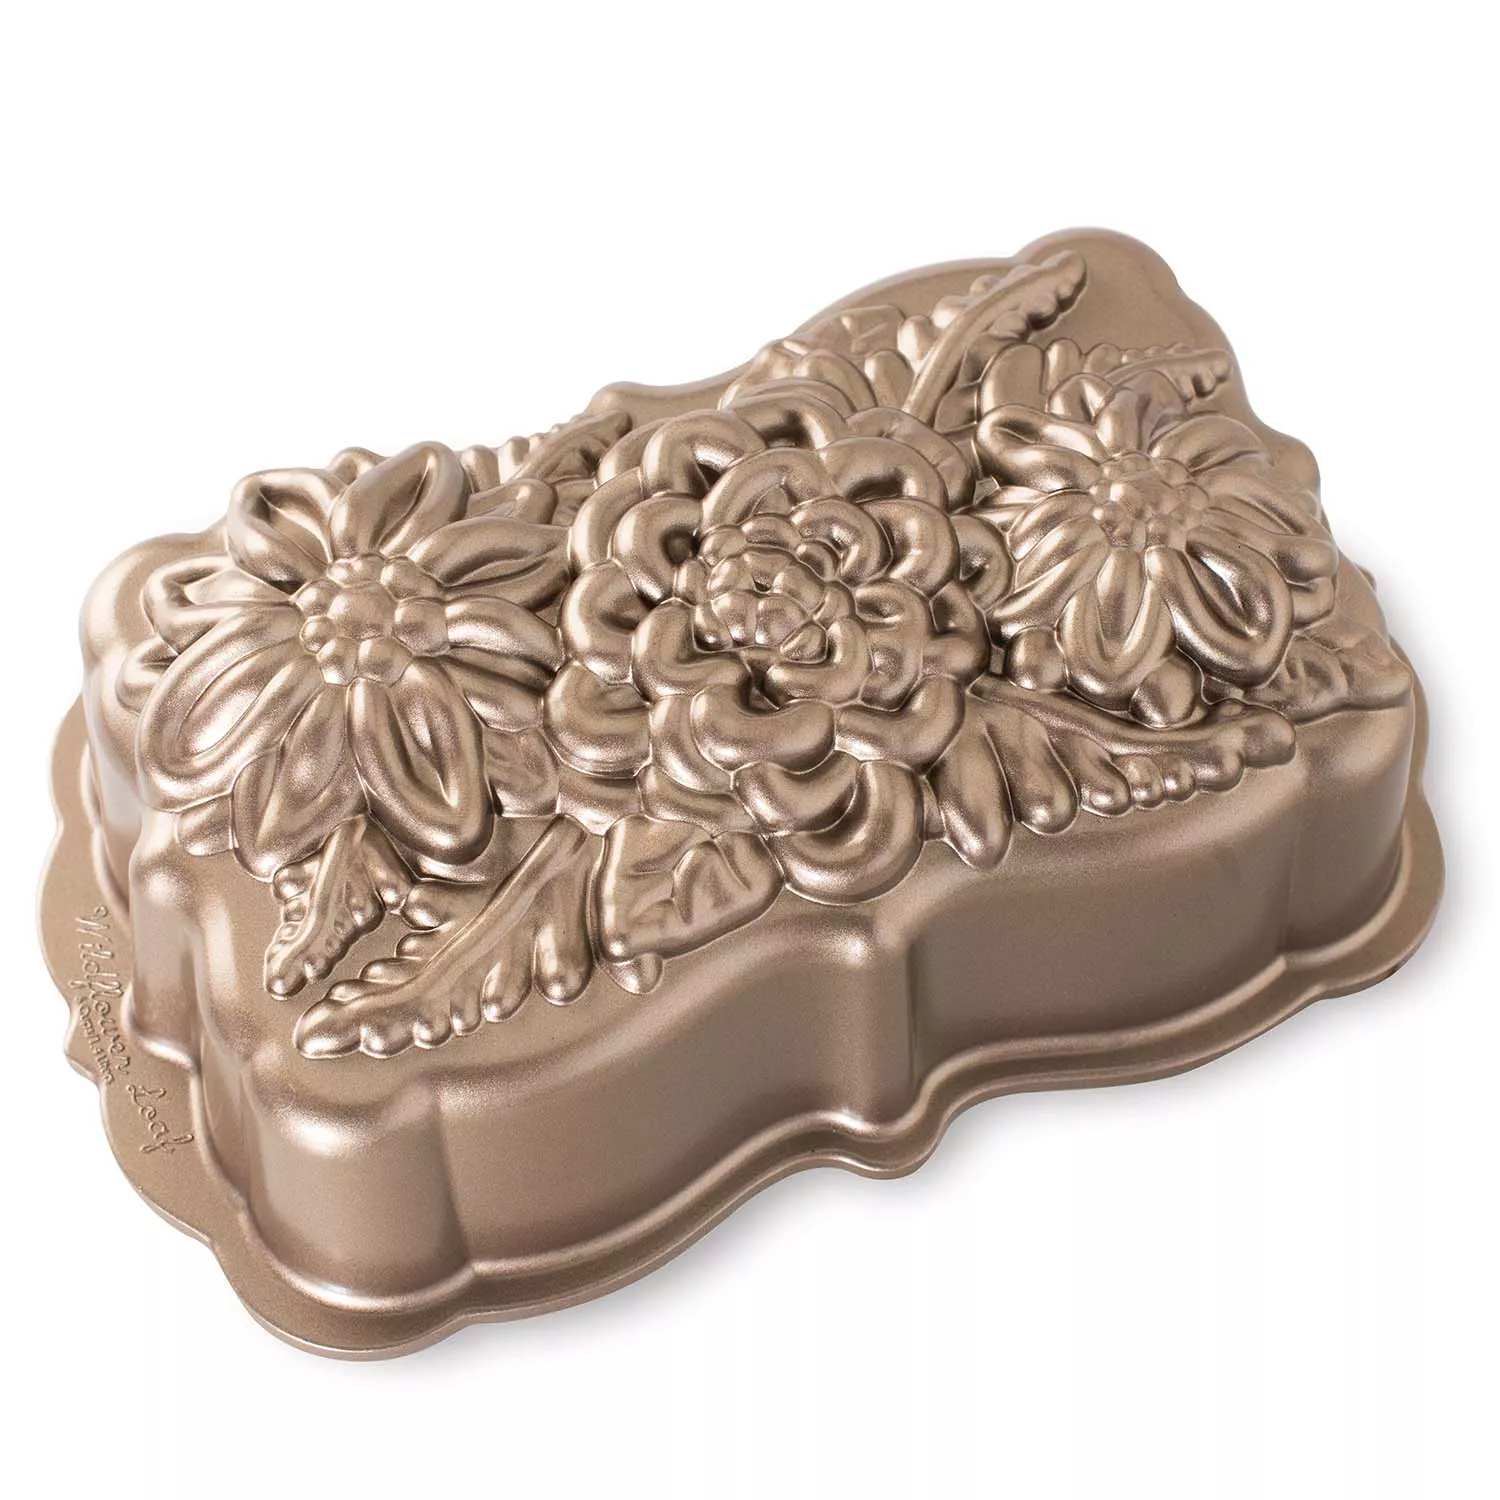 Nordic Ware Holiday Mini Loaf Pan USA Heavy Cast Aluminum New